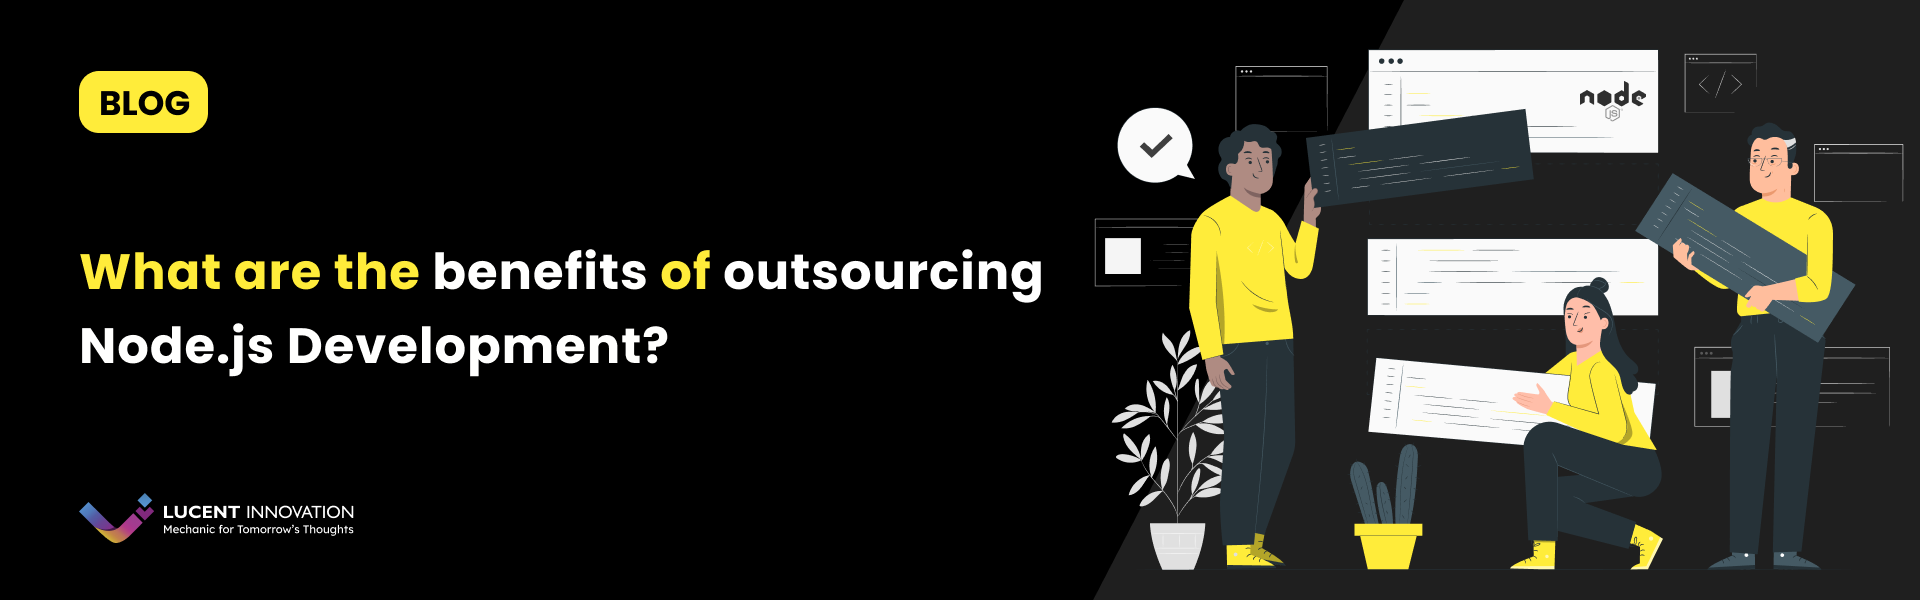 What are the benefits of outsourcing Node.js Development?